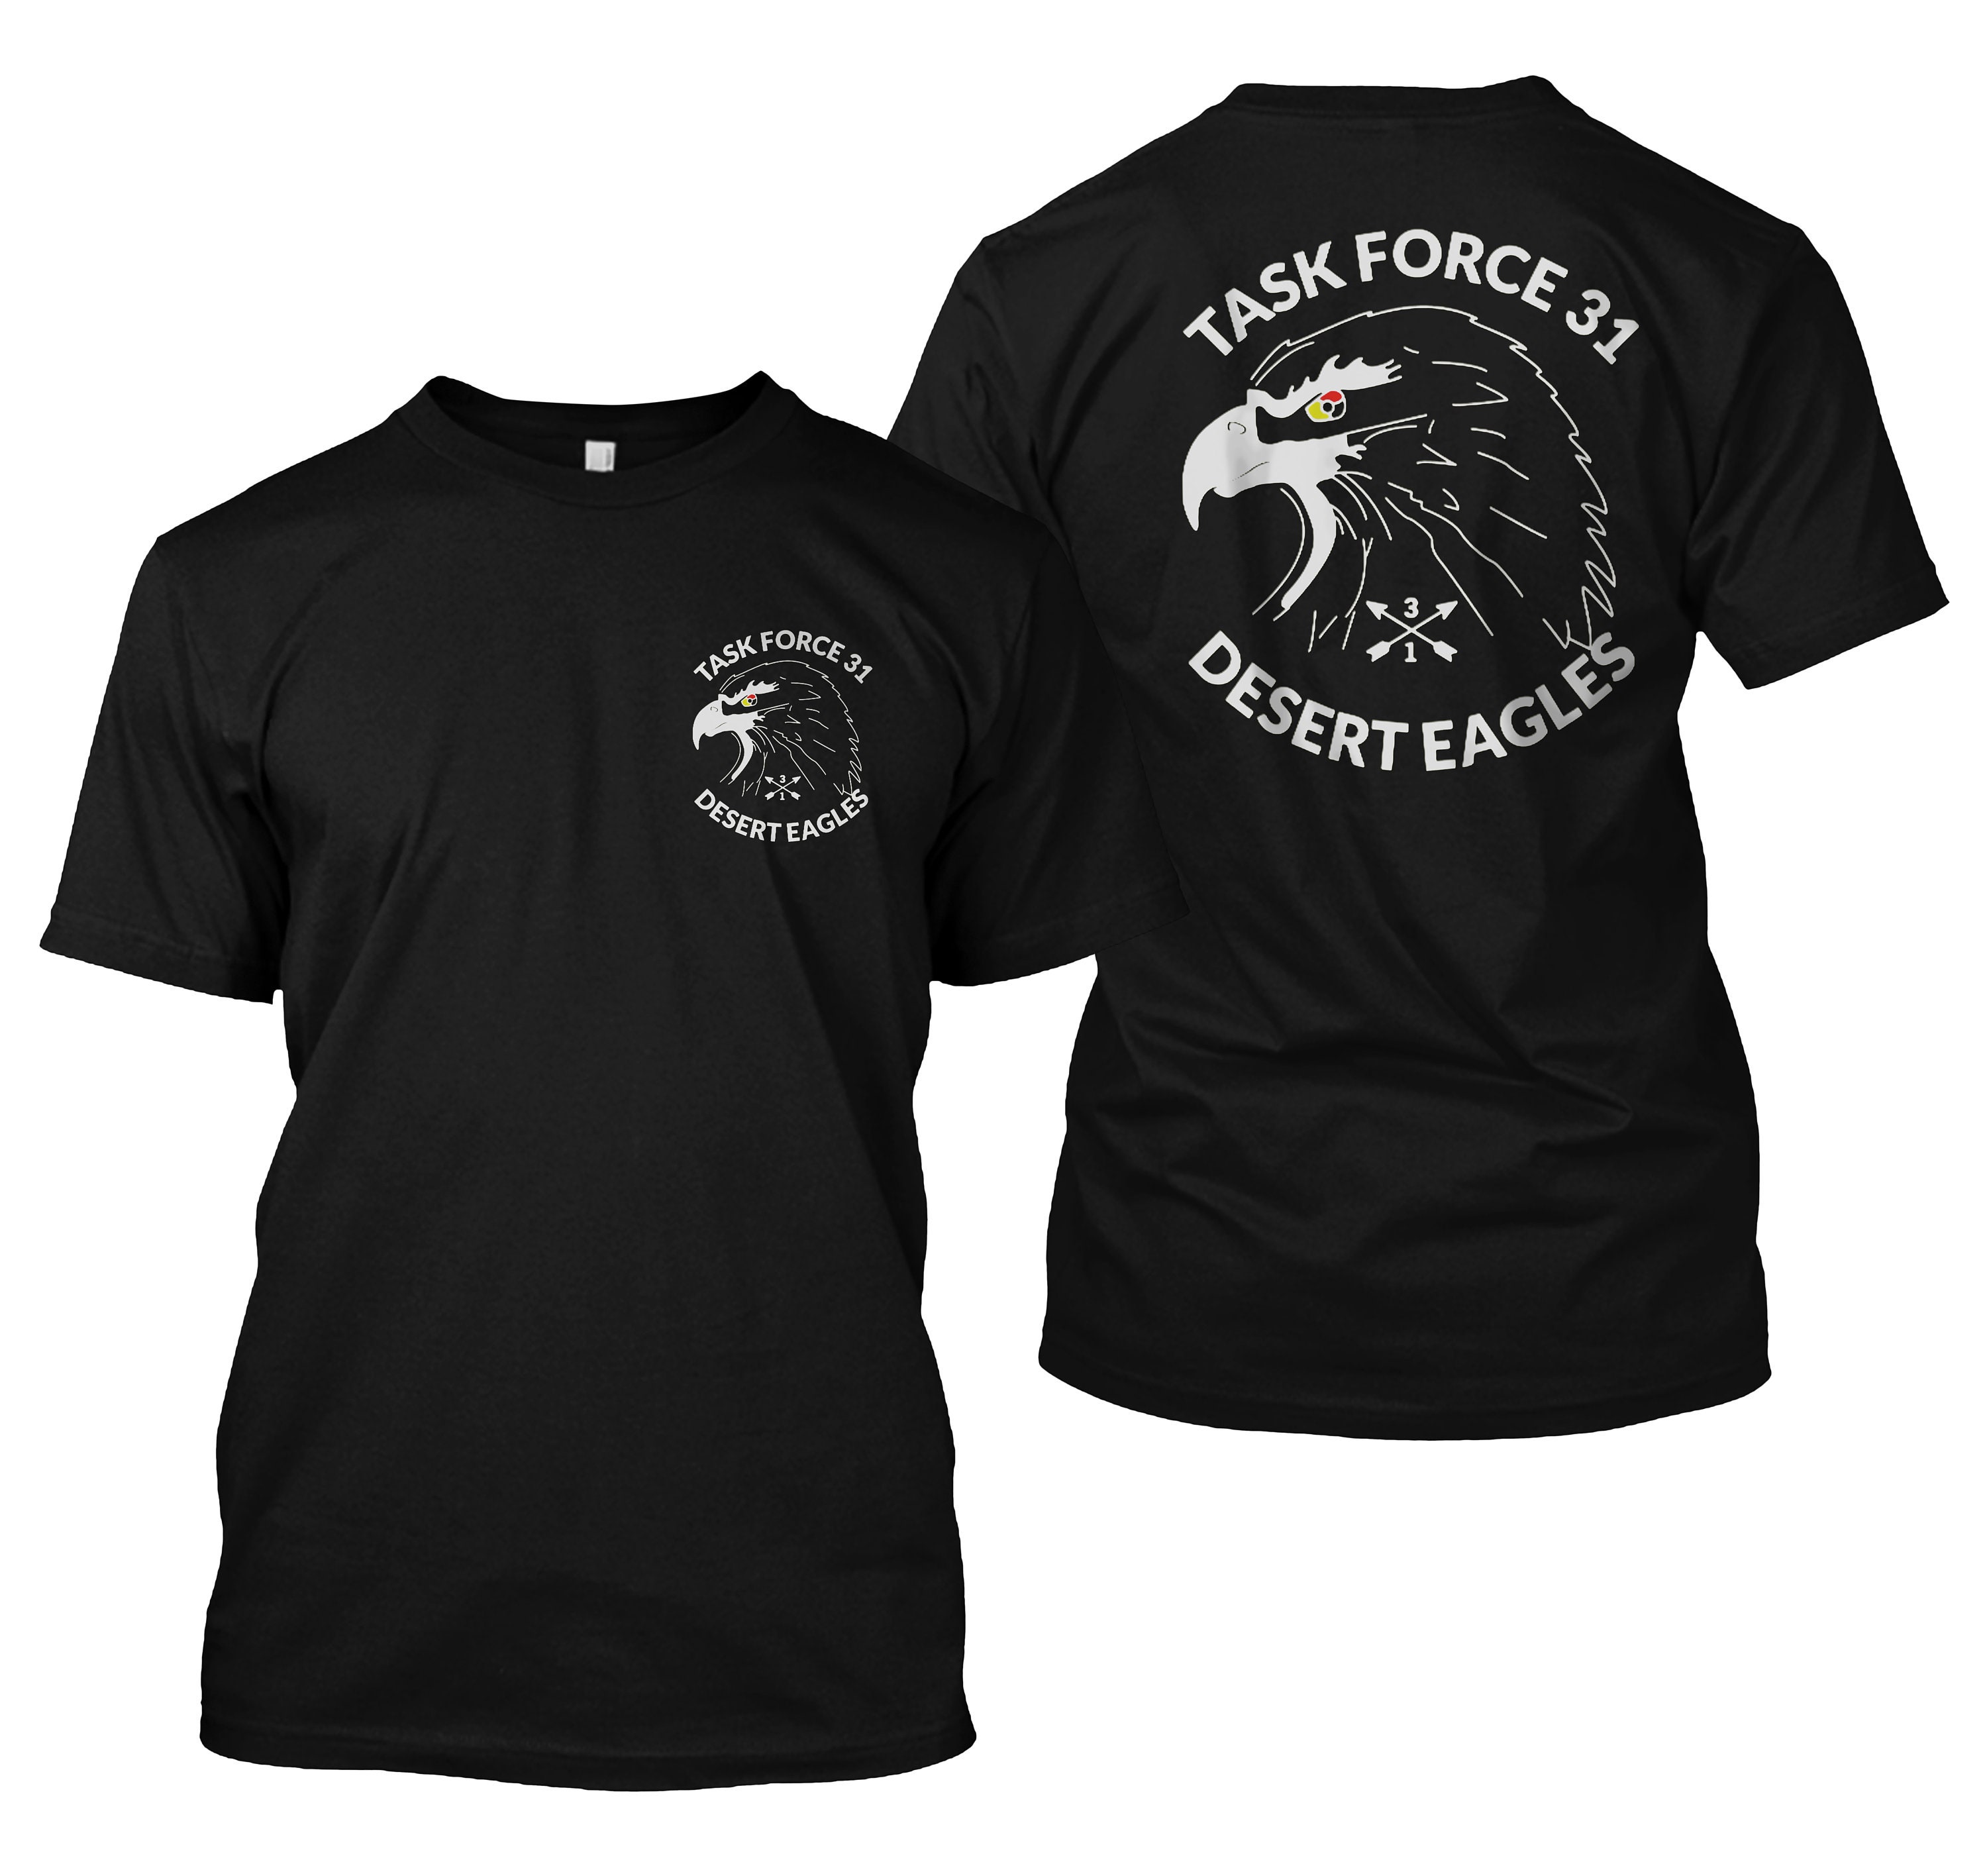 Battalion 3rd Special Forces Group Task Force 31 Double sided tshirt